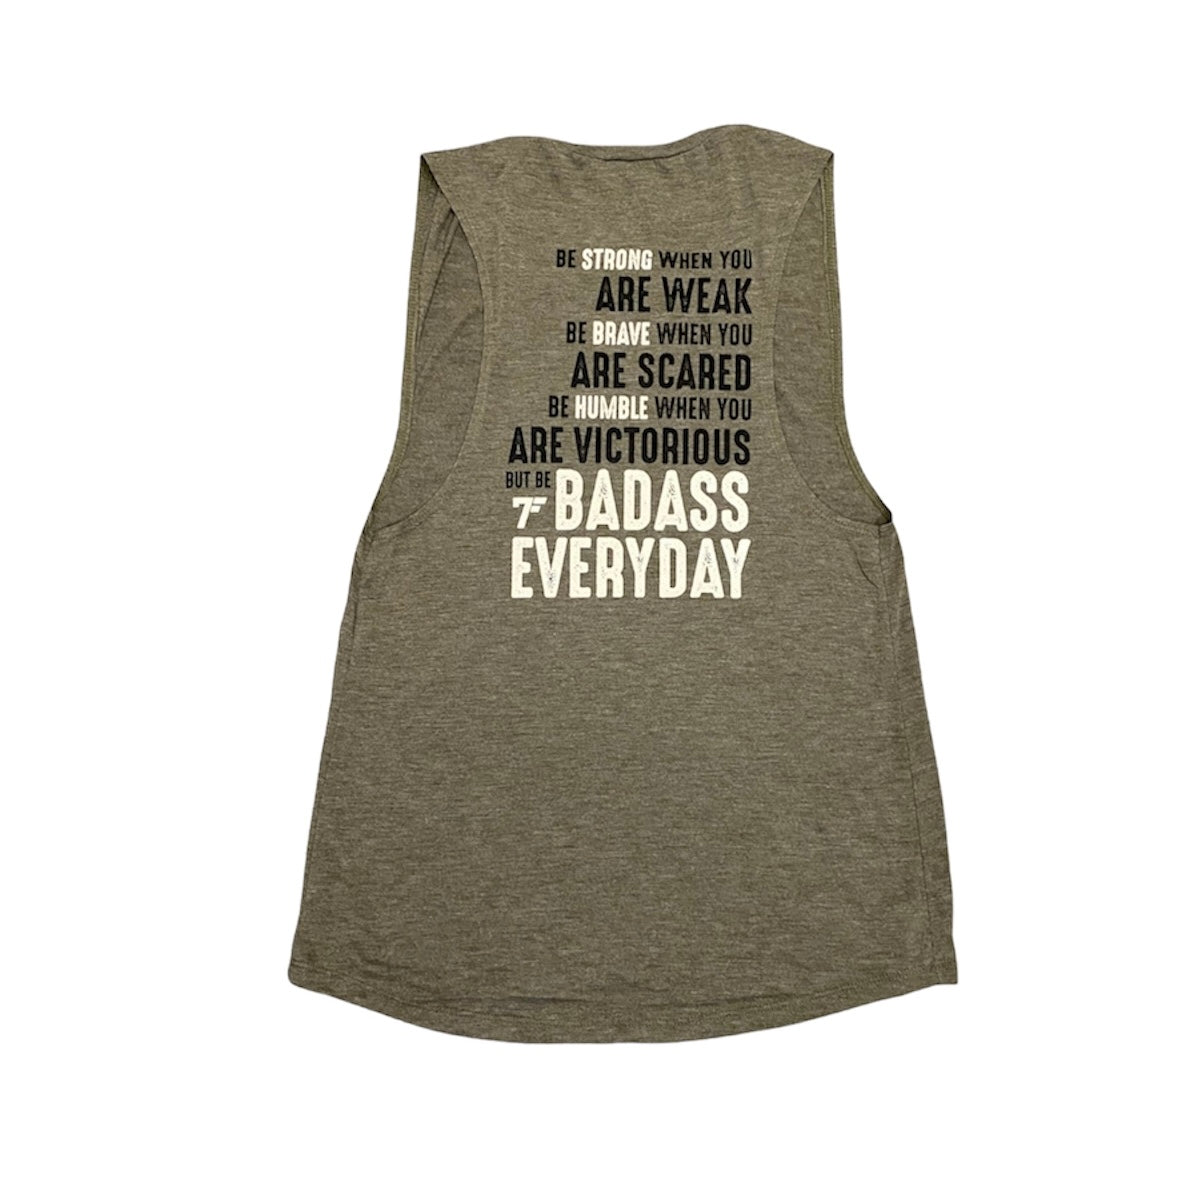 Badass Everyday Women’s Tank - Military Green - 7Five Clothing Co.